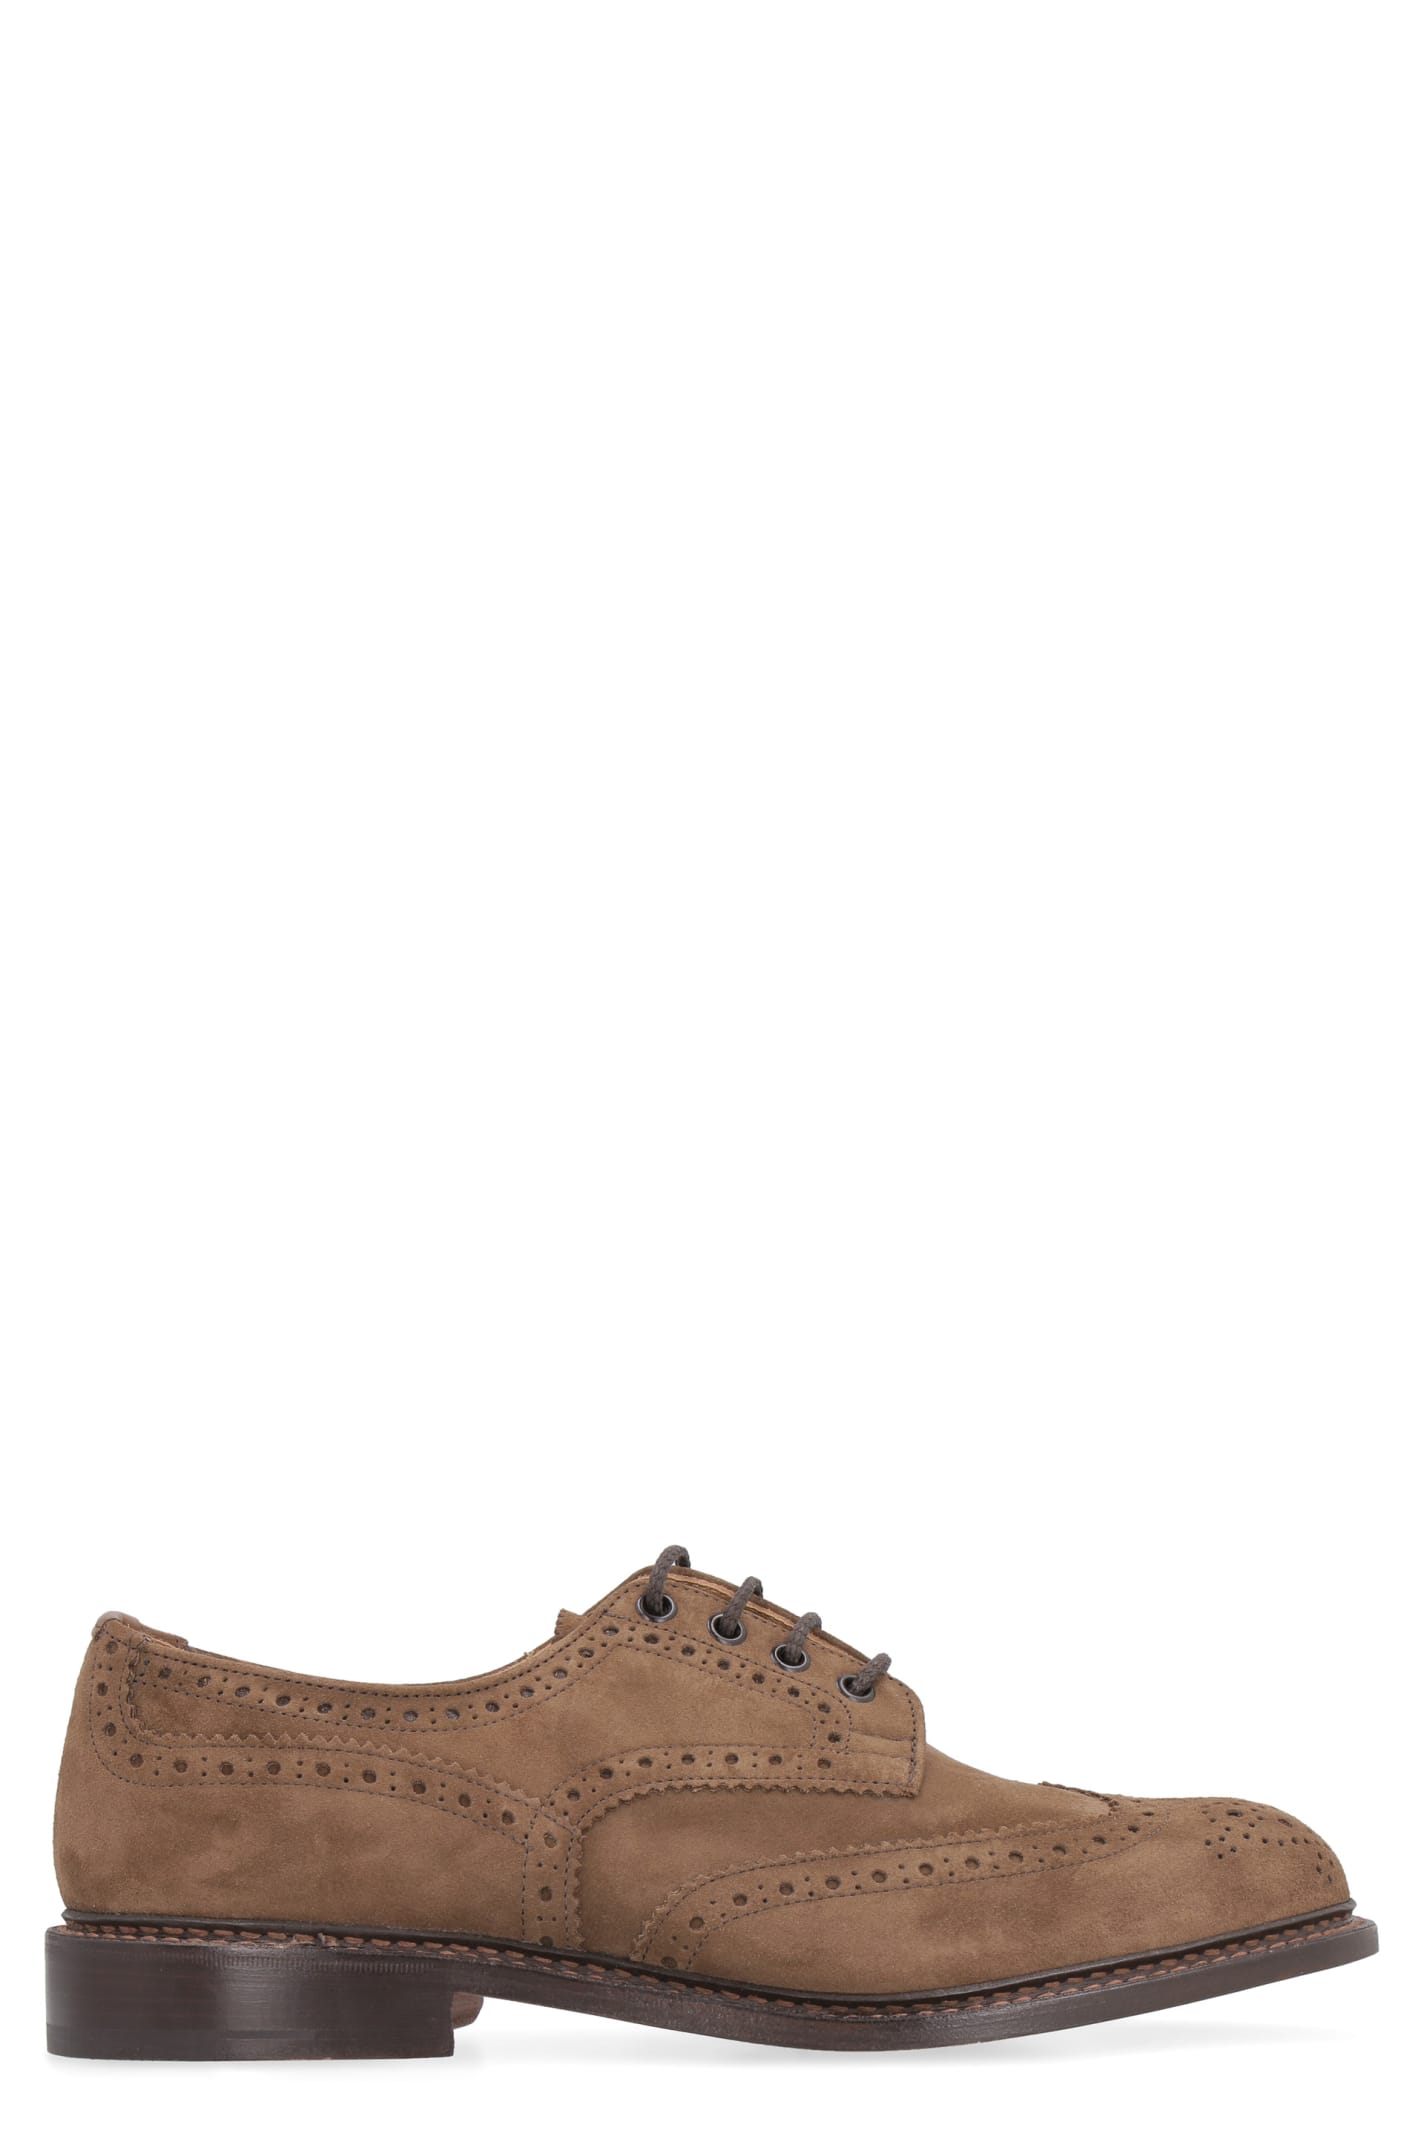 Tricker's Bourton Suede Lace-up Brogue Shoes In Brown